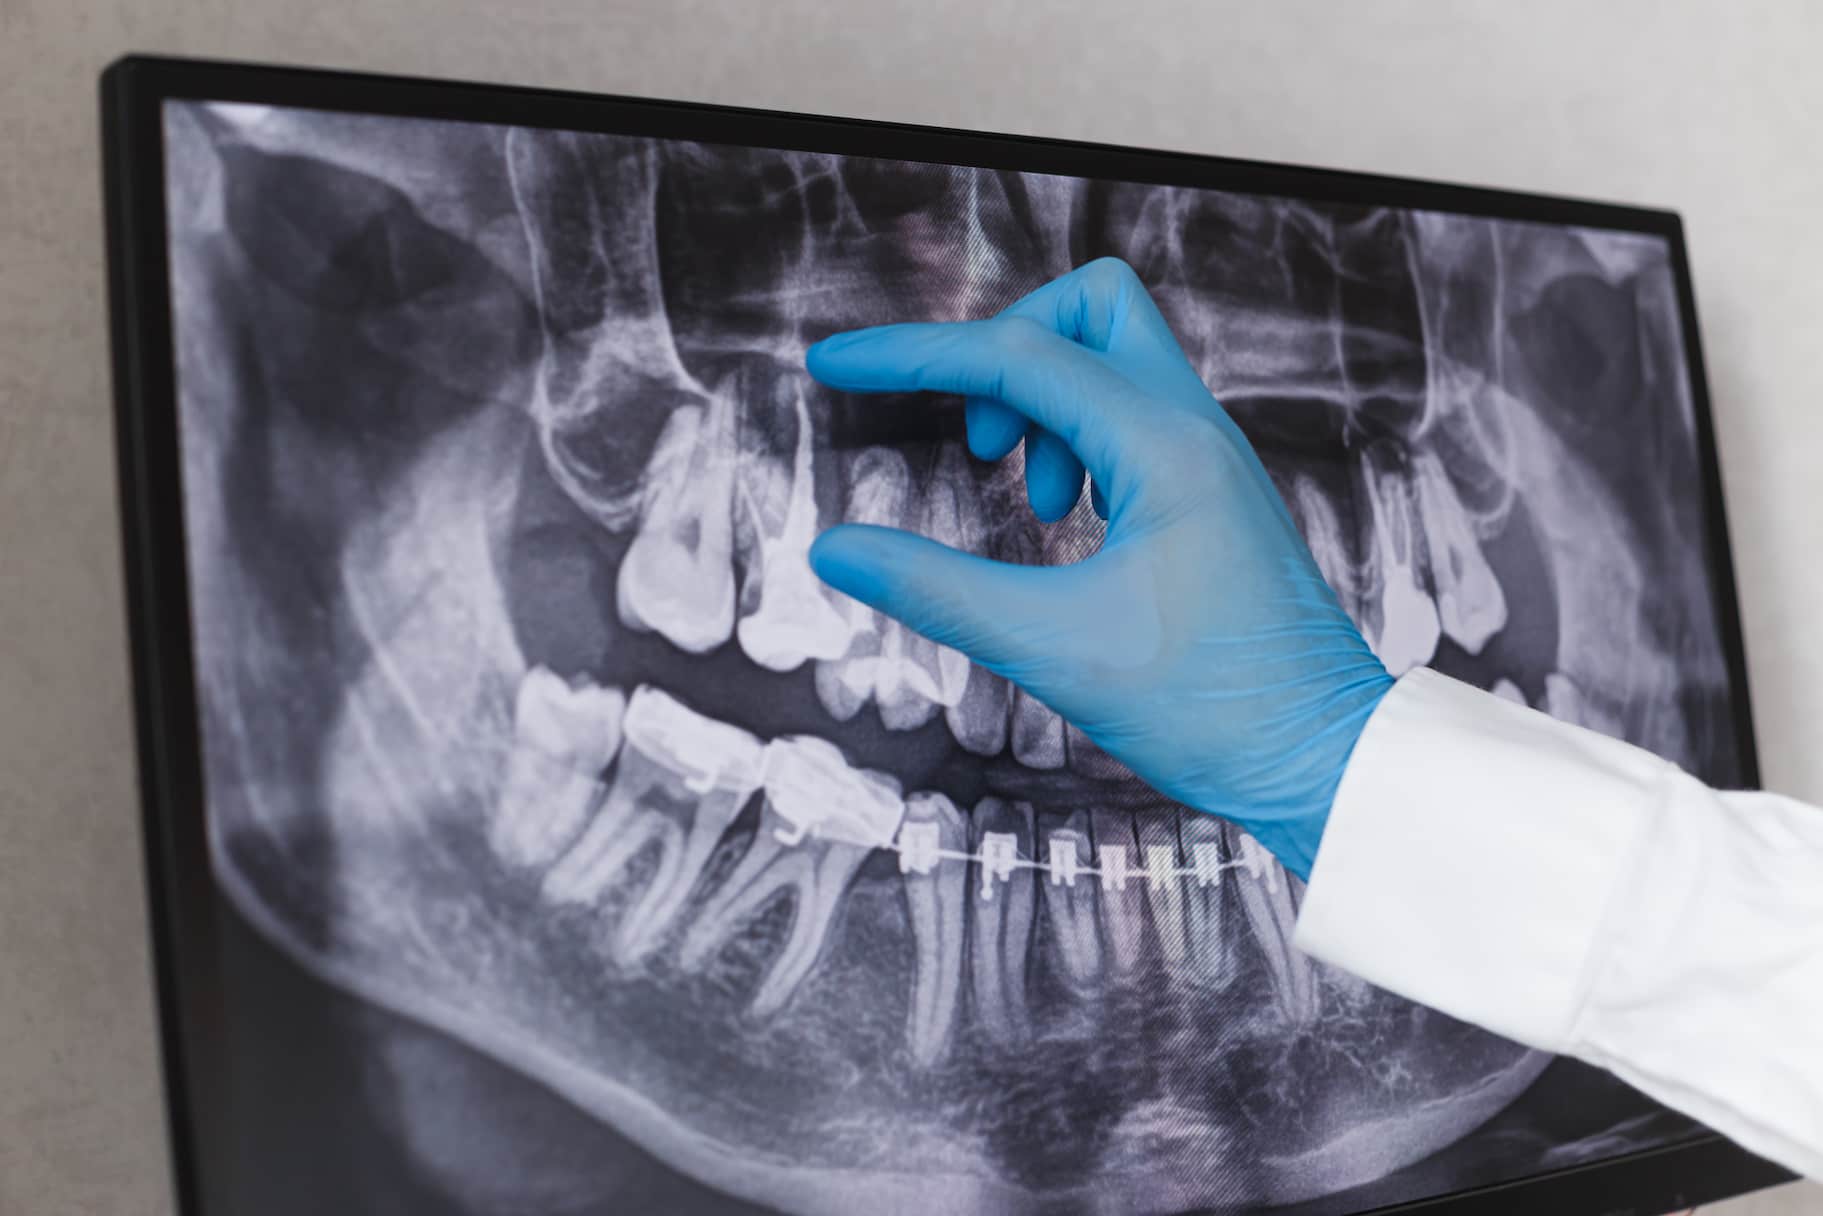 root canal myths debunked separating fact from fiction